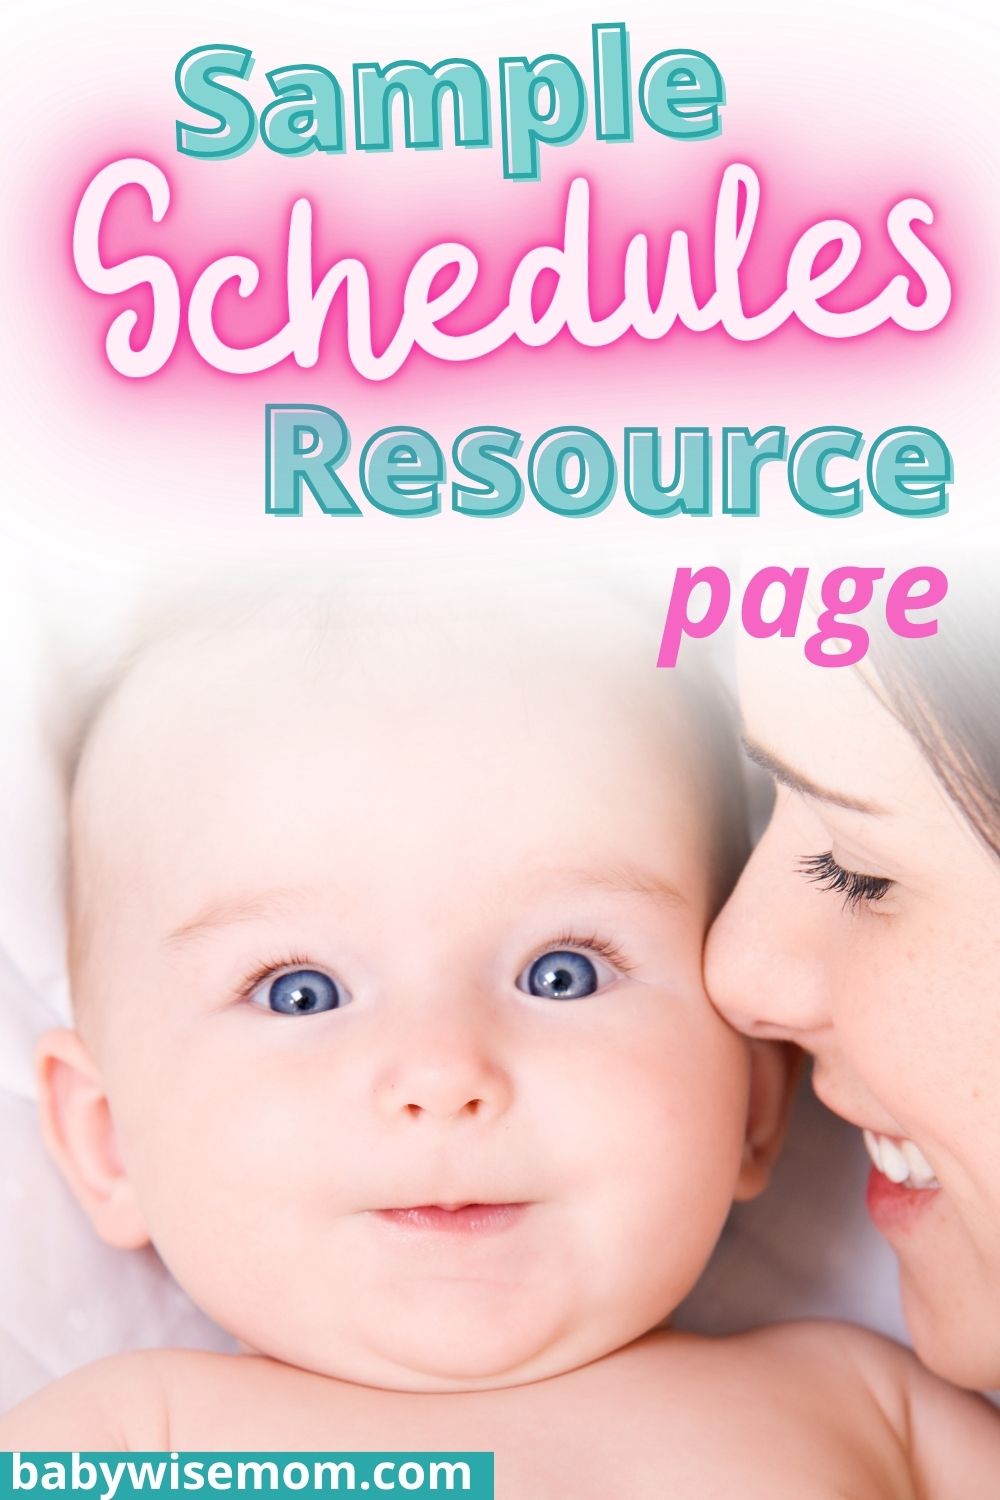 Sample schedules resource page